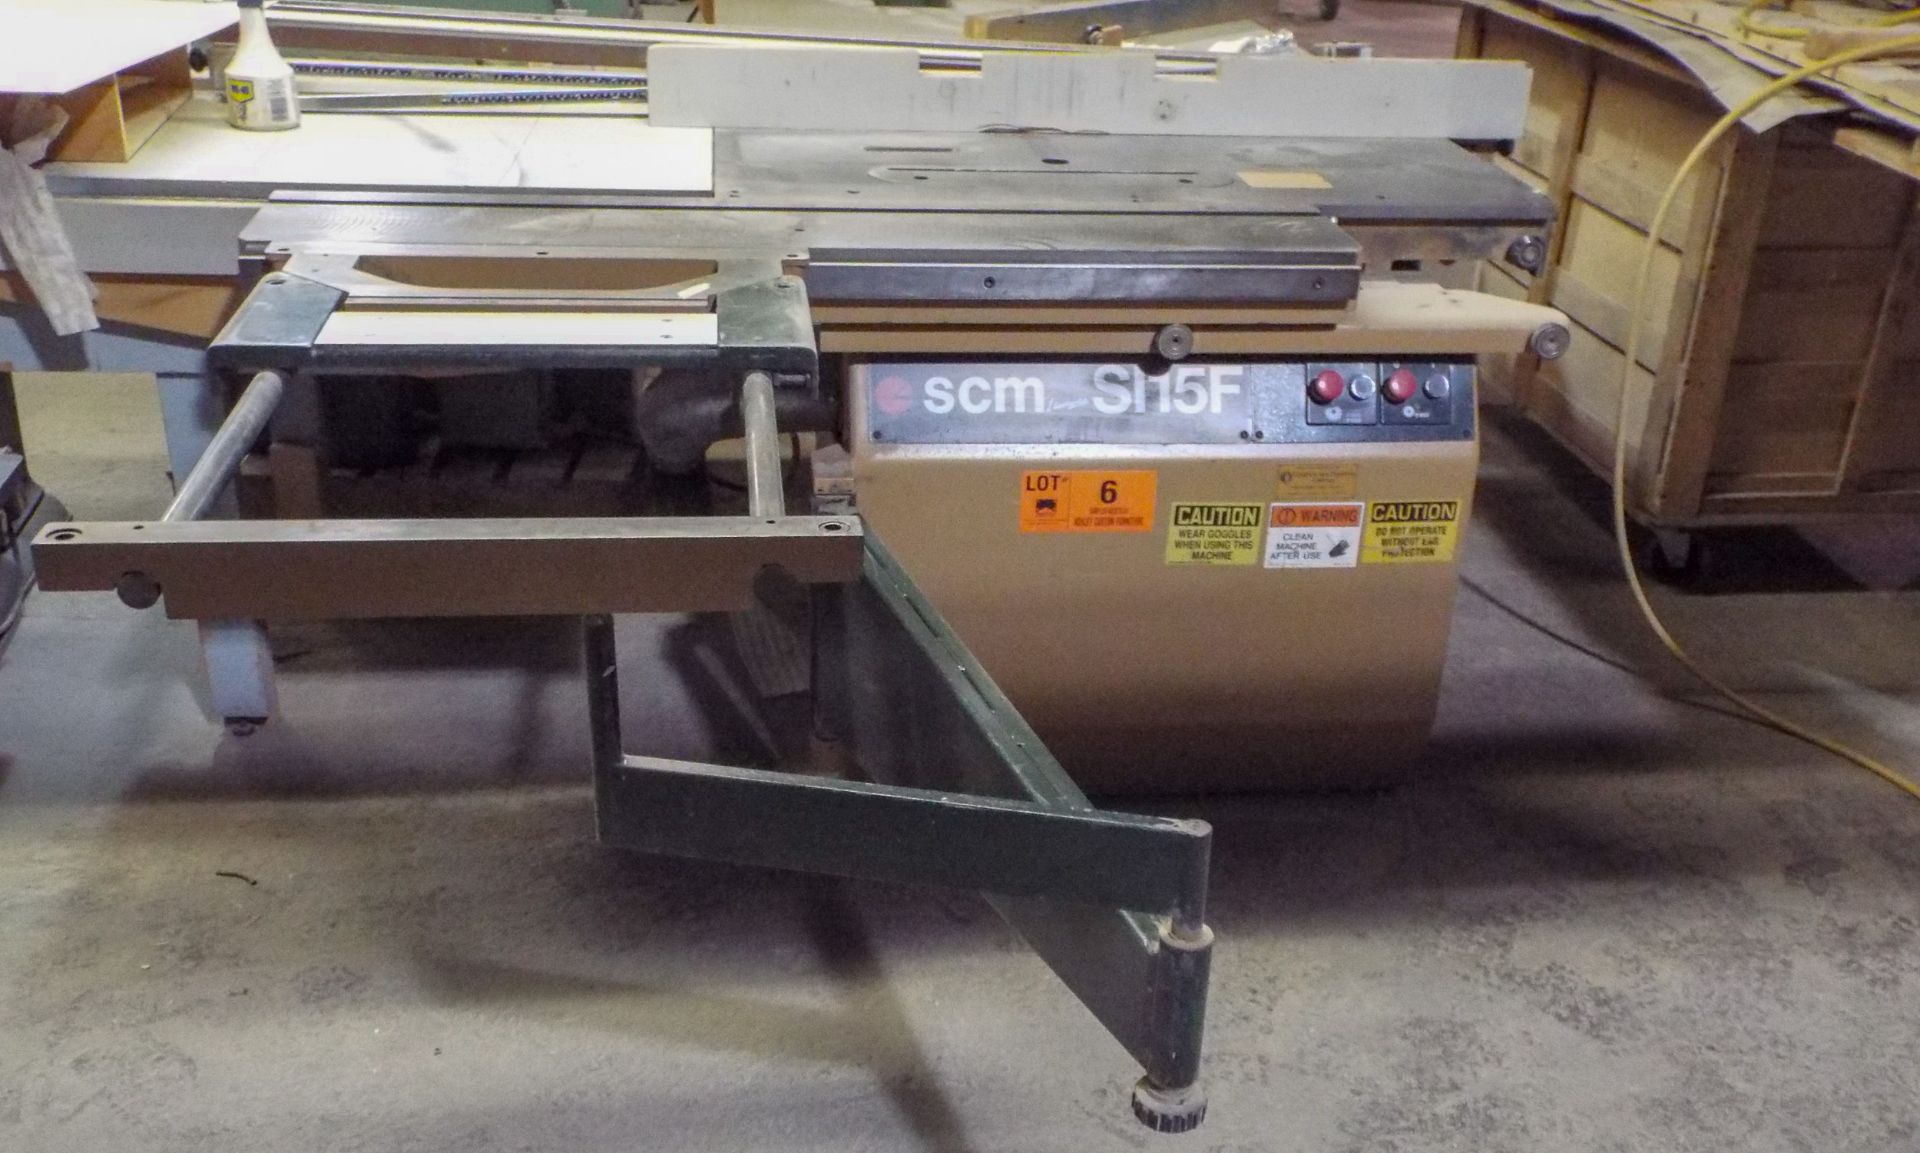 SCM SI15F SLIDING TABLE CONVENTIONAL SAW WITH 60"X10" SLIDING TABLE, 60" TABLE STROKE, 7.5 HP MAIN - Image 2 of 5